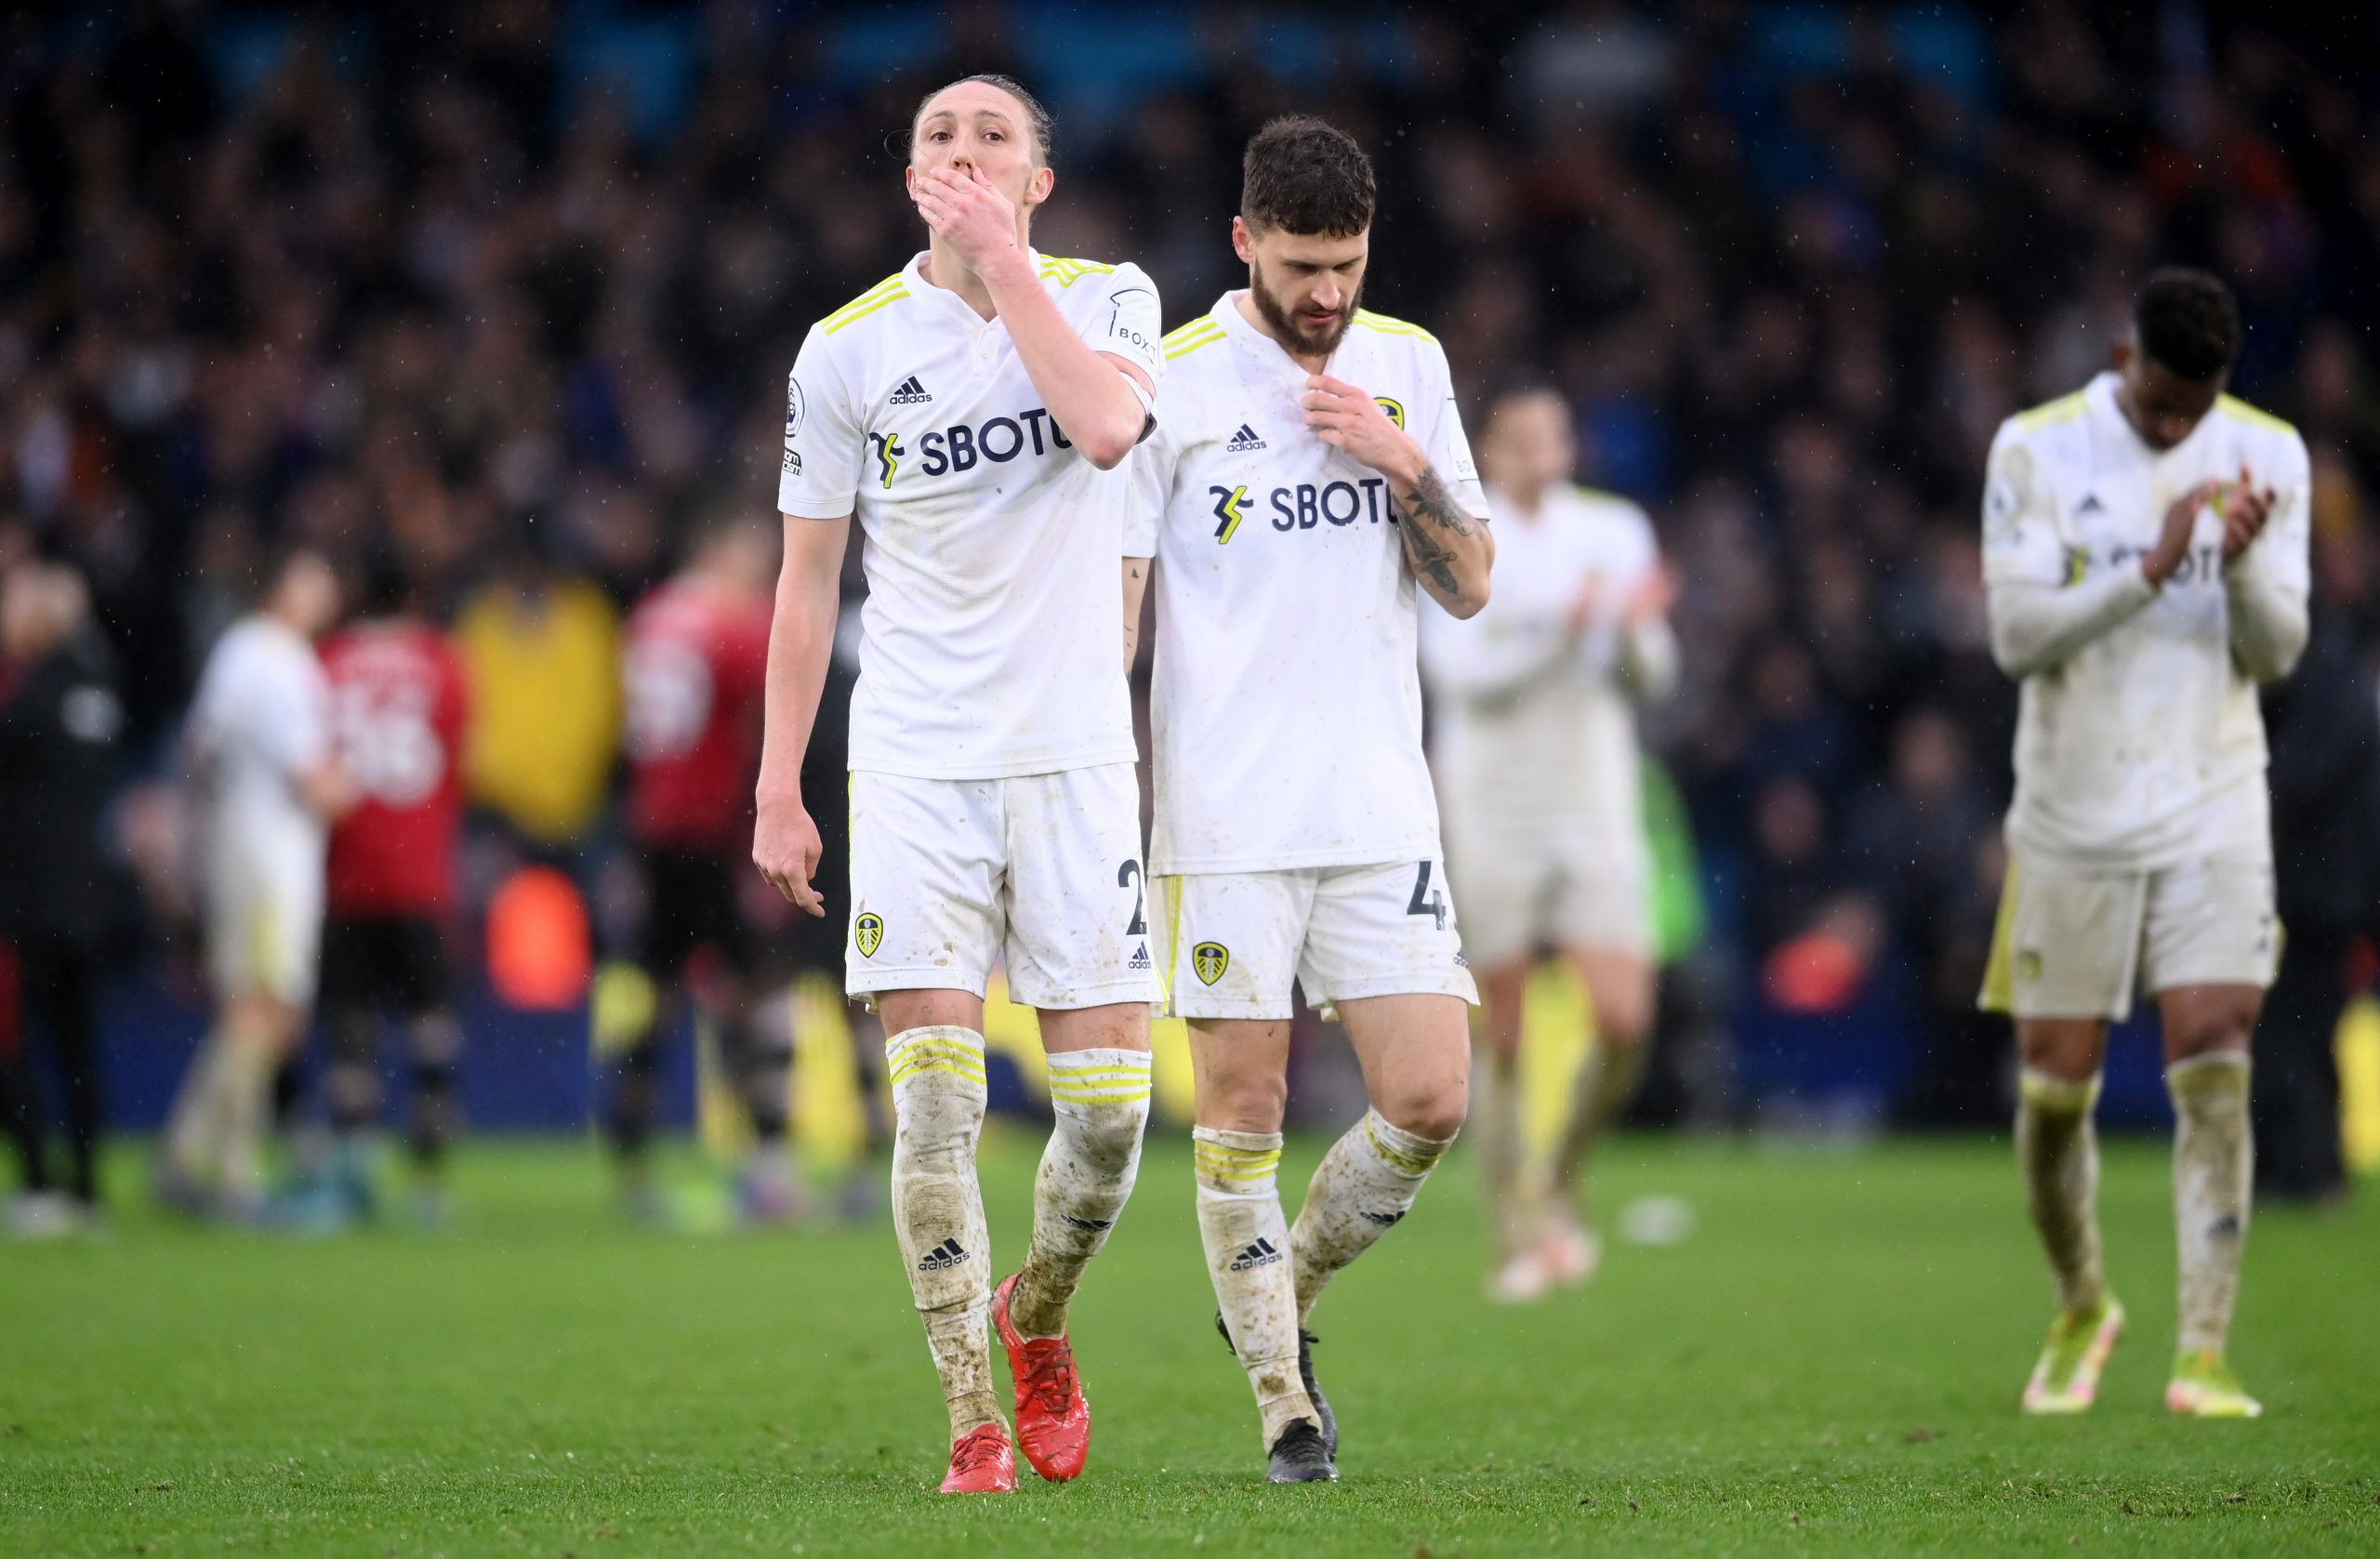 LEEDS, ENGLAND - FEBRUARY 20: Luke Ayling (L) and Mateusz Klich of Leeds United look dejected following defeat in the Premier League match between Leeds United and Manchester United at Elland Road on February 20, 2022 in Leeds, England. (Photo by Laurence Griffiths/Getty Images)The 4th Official uses images provided by the following image agency:
Getty Images (https://www.gettyimages.de/)
Imago Images (https://www.imago-images.de/)